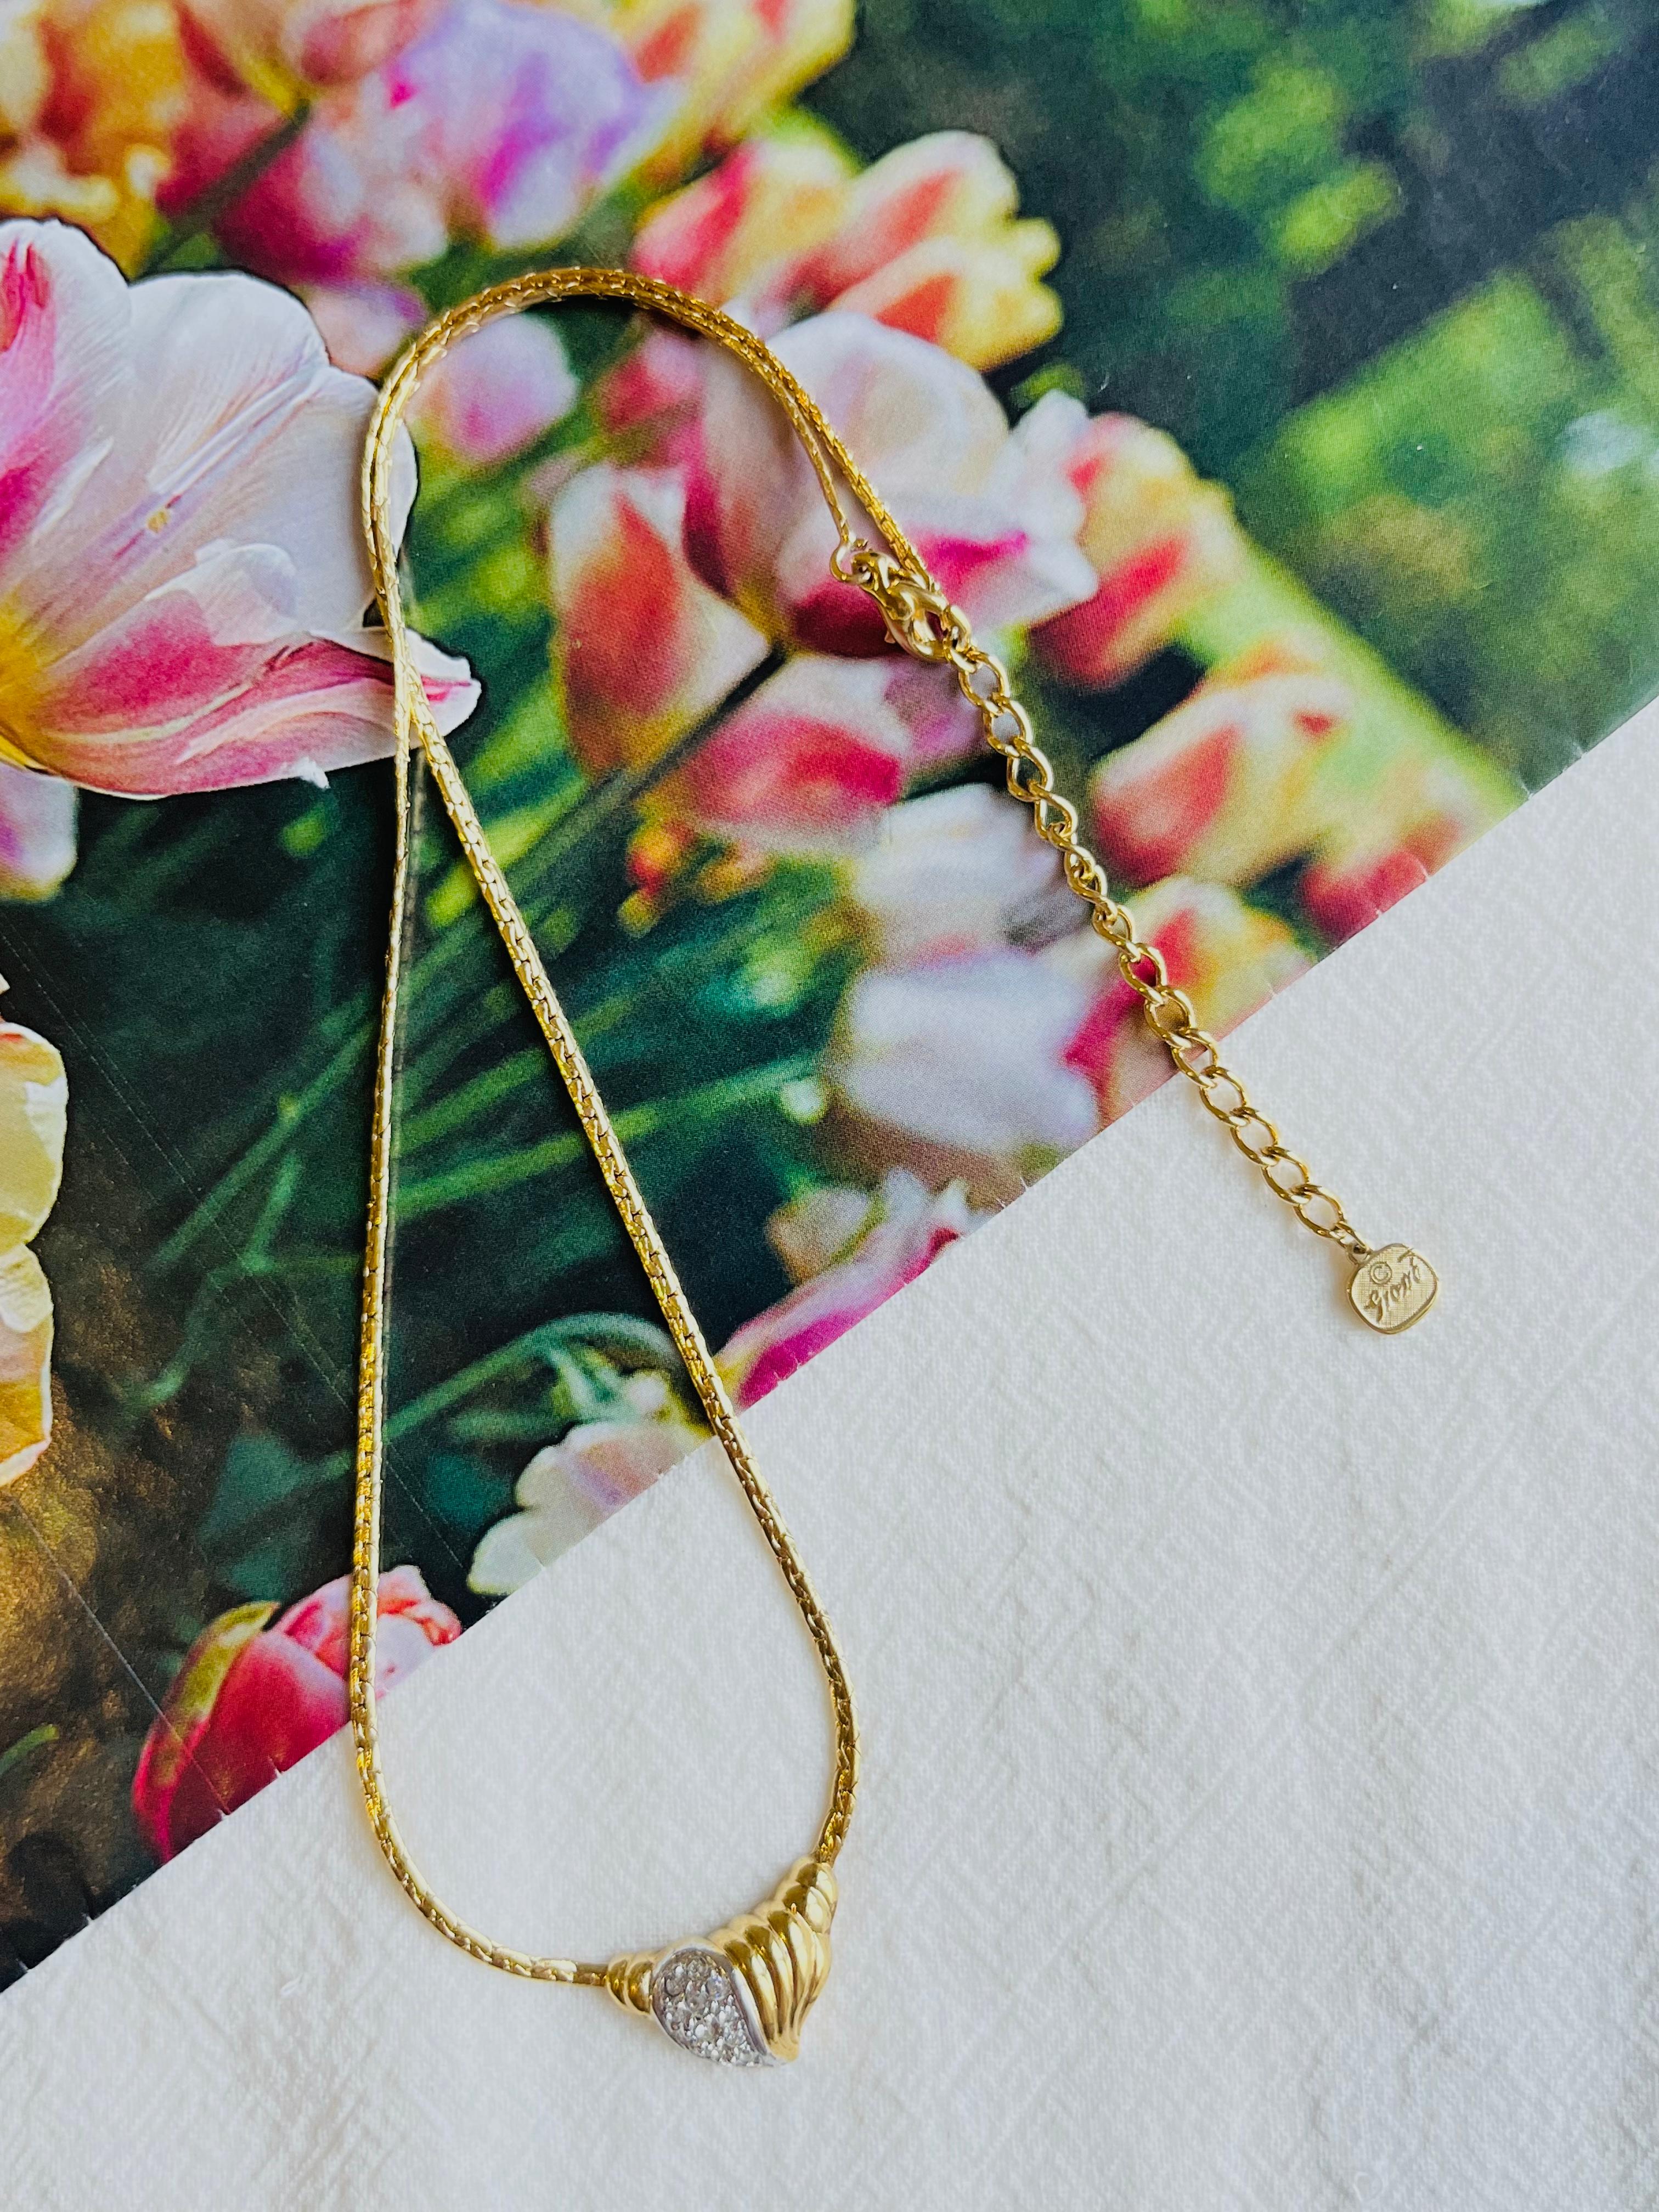 Very good condition. Scratches or colour loss at gold heart side, barely noticeable.

100% Genuine. Rare to find.

Signed Grosse at back and extend chain.

Size:  36 cm. Extend chain: 6 cm. Pendant: 1.8*1.6 cm.

Weight: 8 g.

_ _ _

Great for